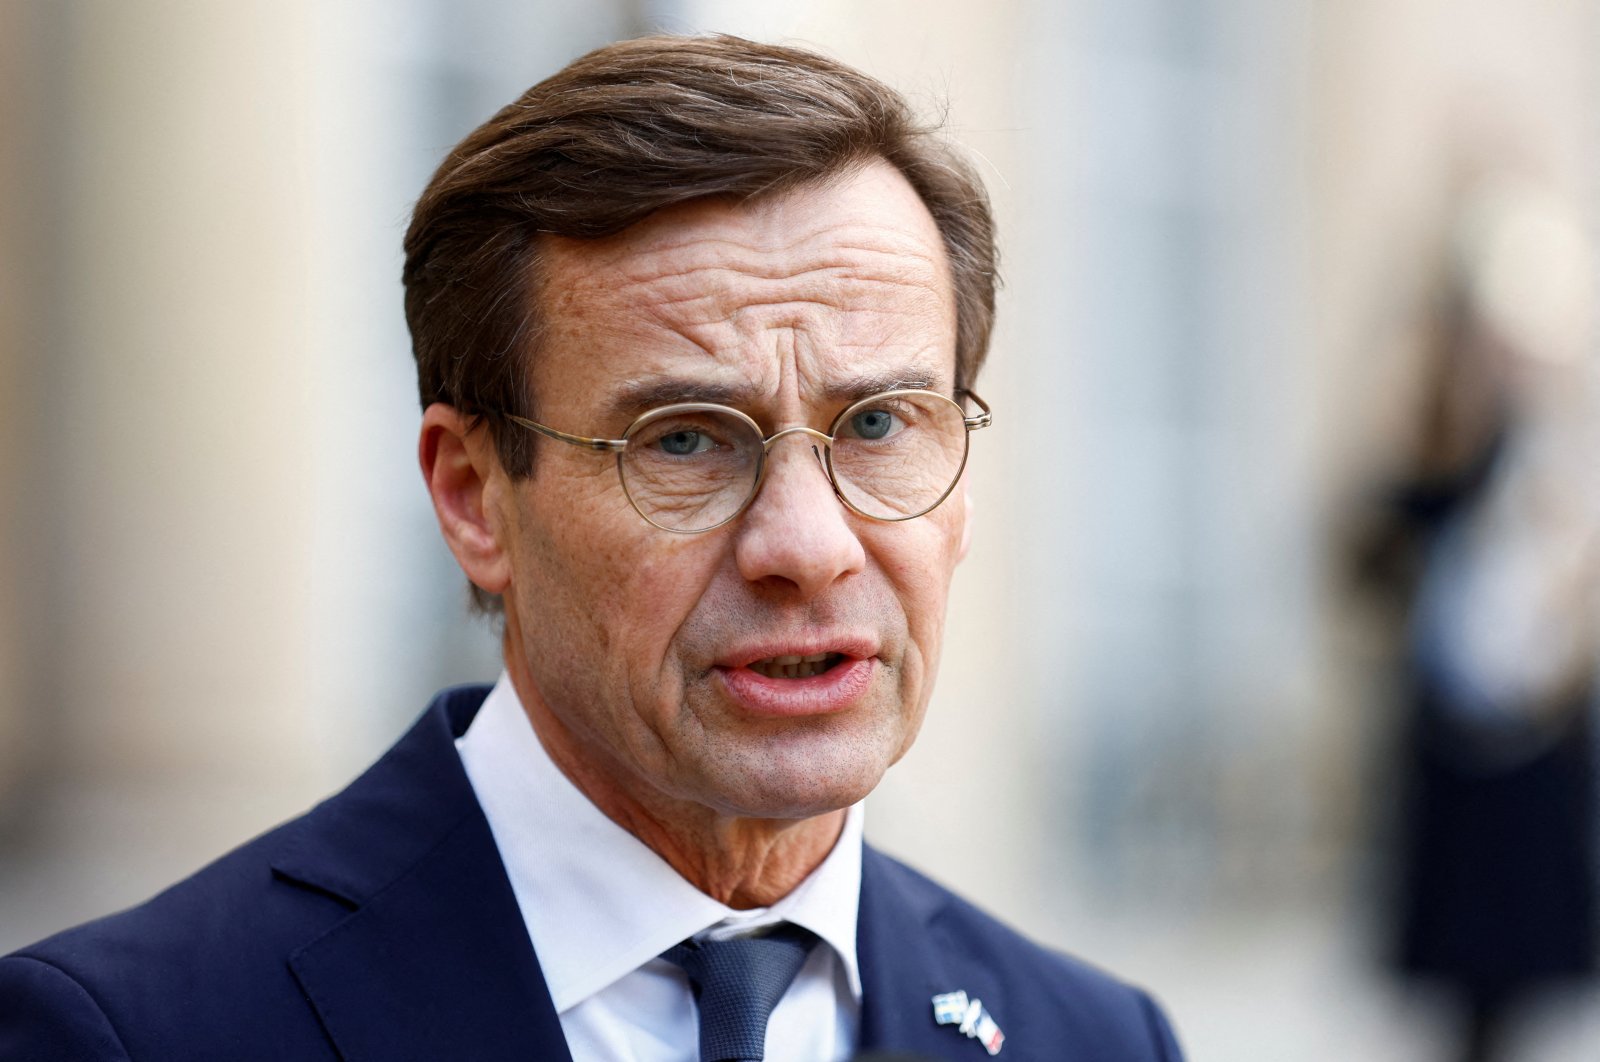 Swedish Prime Minister Ulf Kristersson speaks during a joint statement with French President Emmanuel Macron before a meeting at the Elysee Palace in Paris, France, Jan. 3, 2023. (Reuters File Photo)